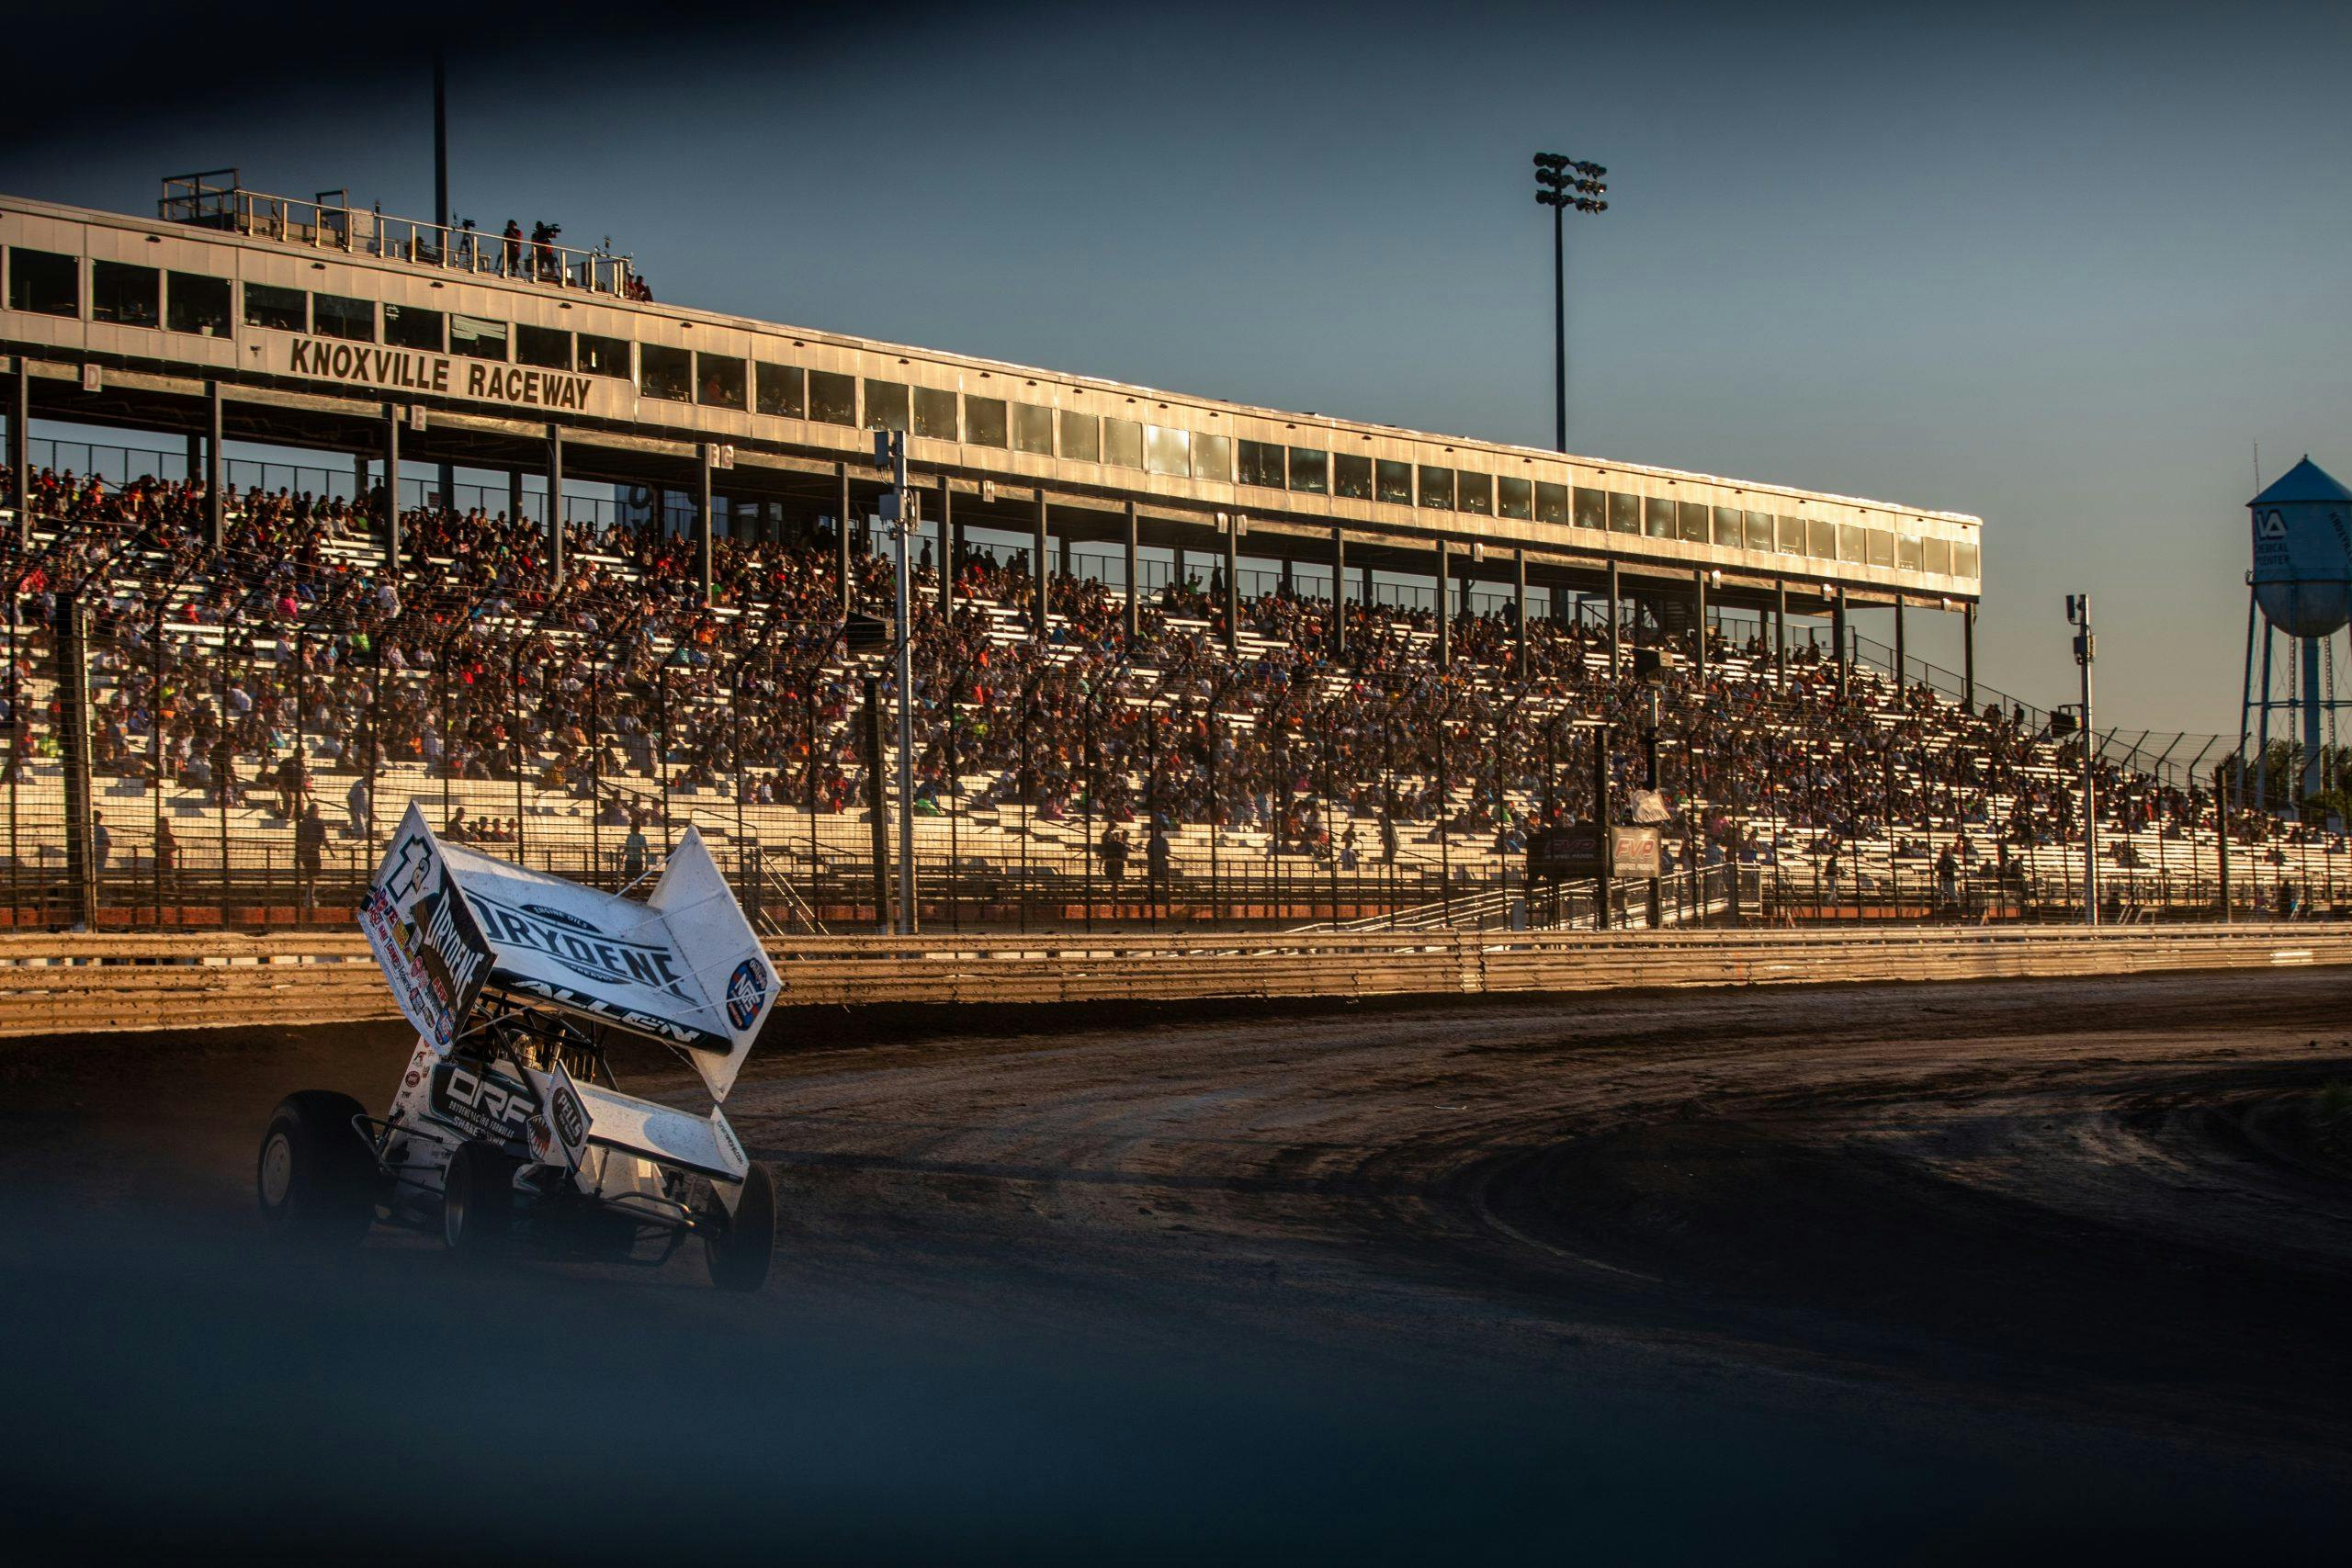 Knoxville Raceway dirt track racing action